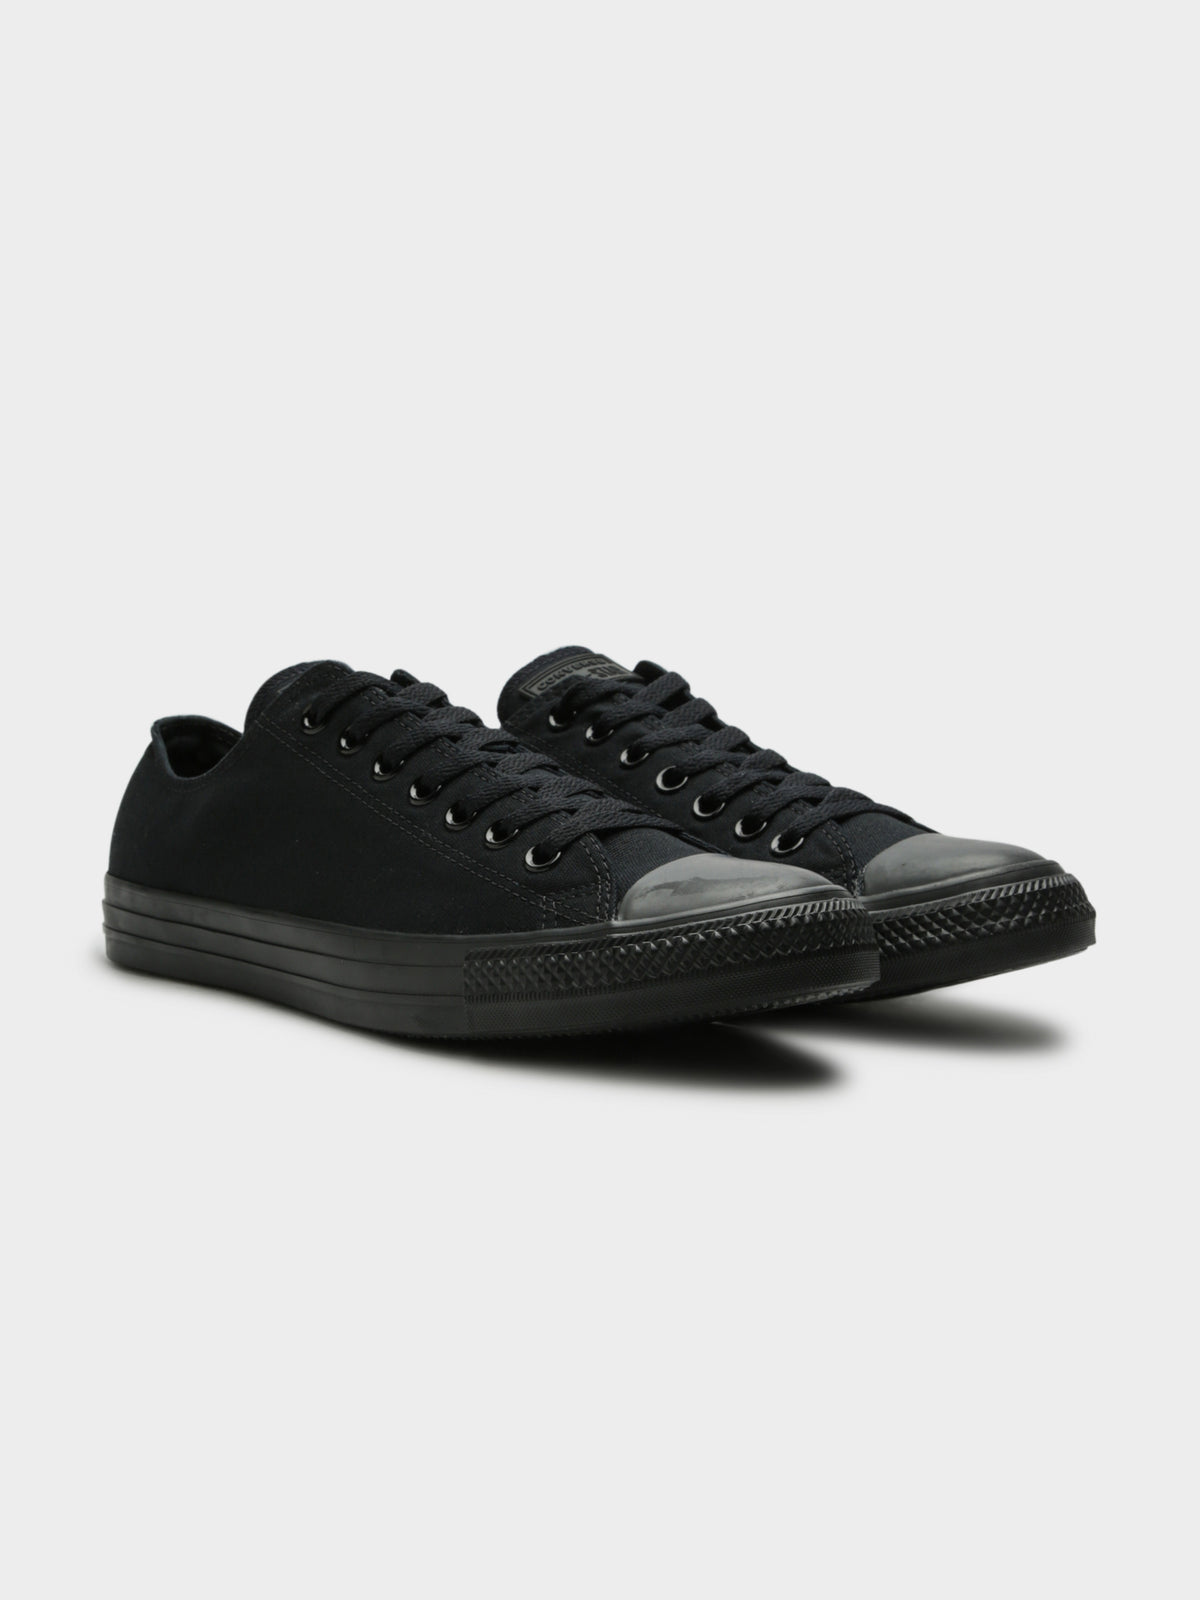 Unisex Chuck Taylor All Star Classic Low-Top Sneakers in Monochrome Ox Black